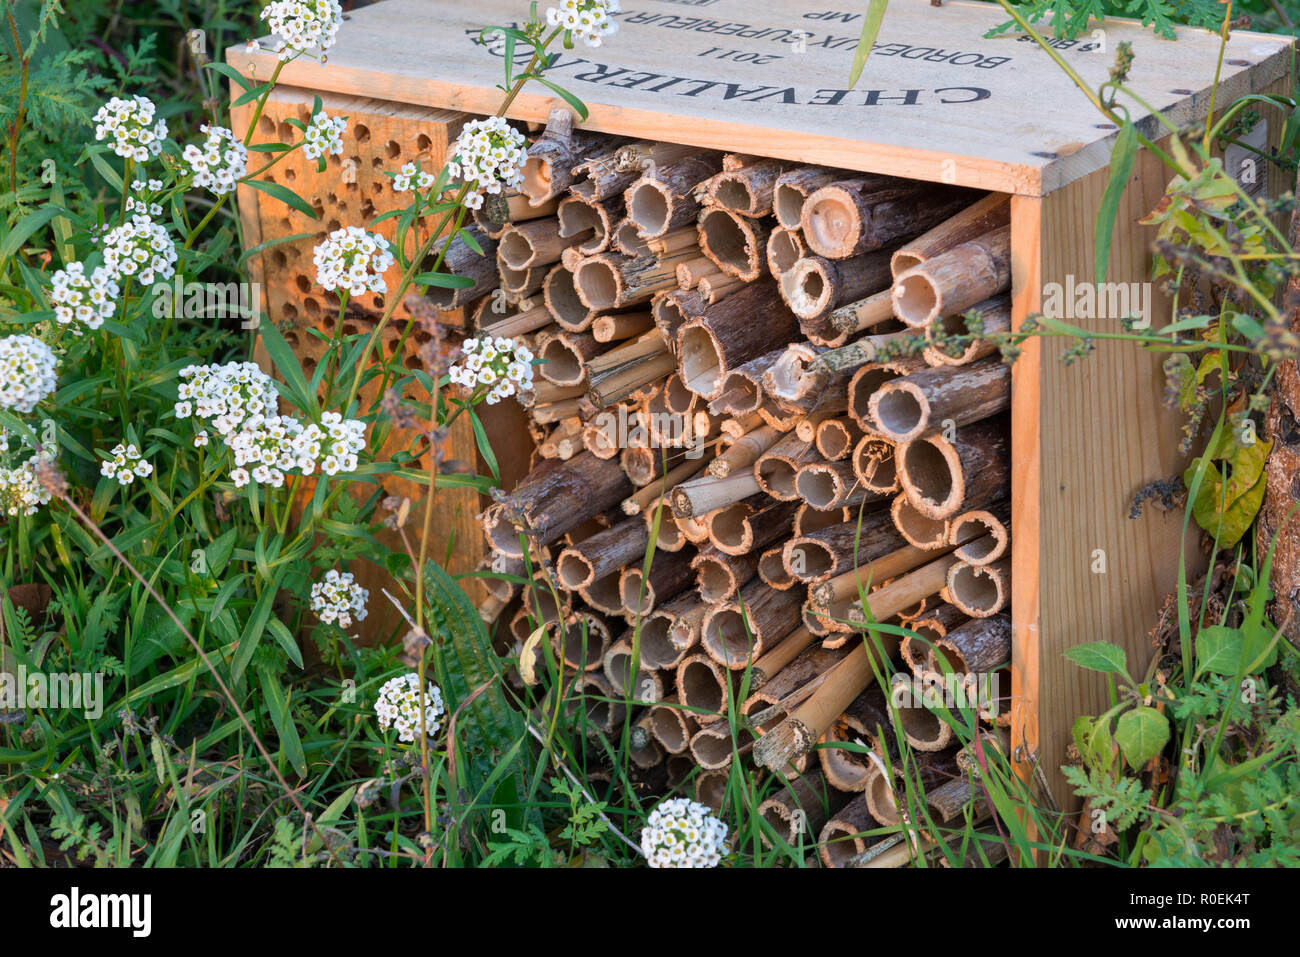 Bee housing in holes and sticks in old wine crate Stock Photo